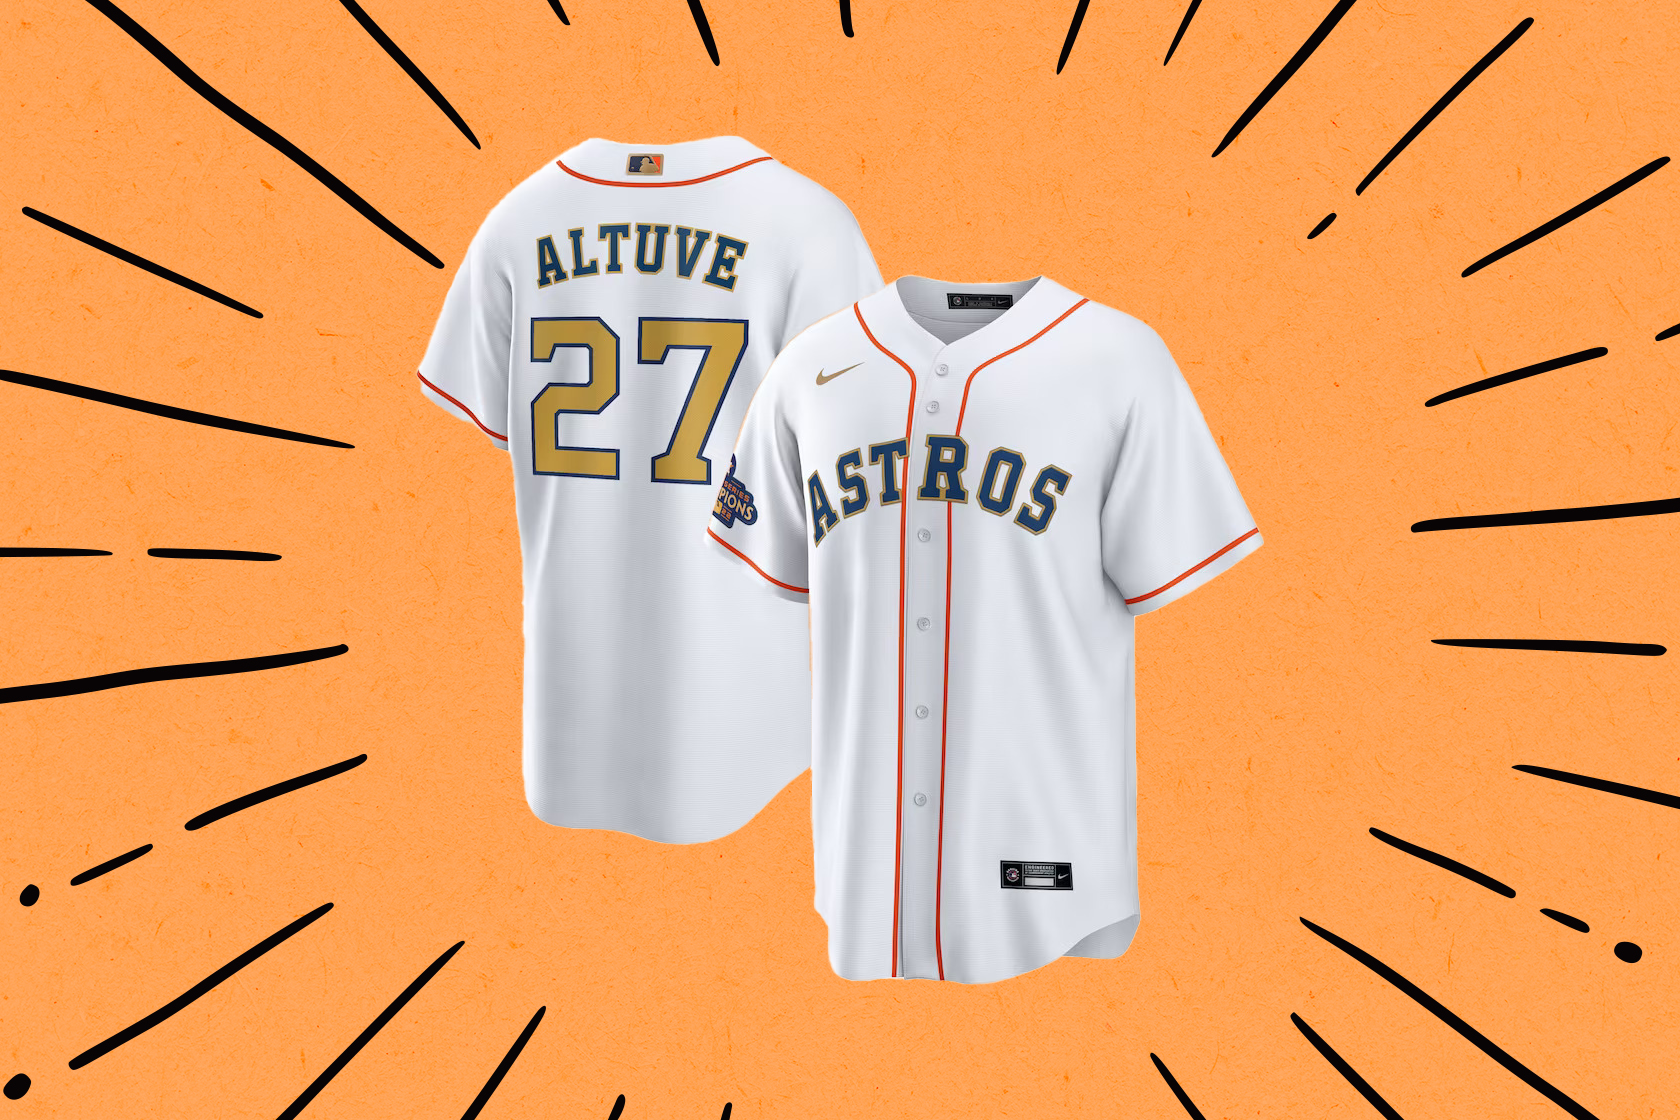 astros jersey by year